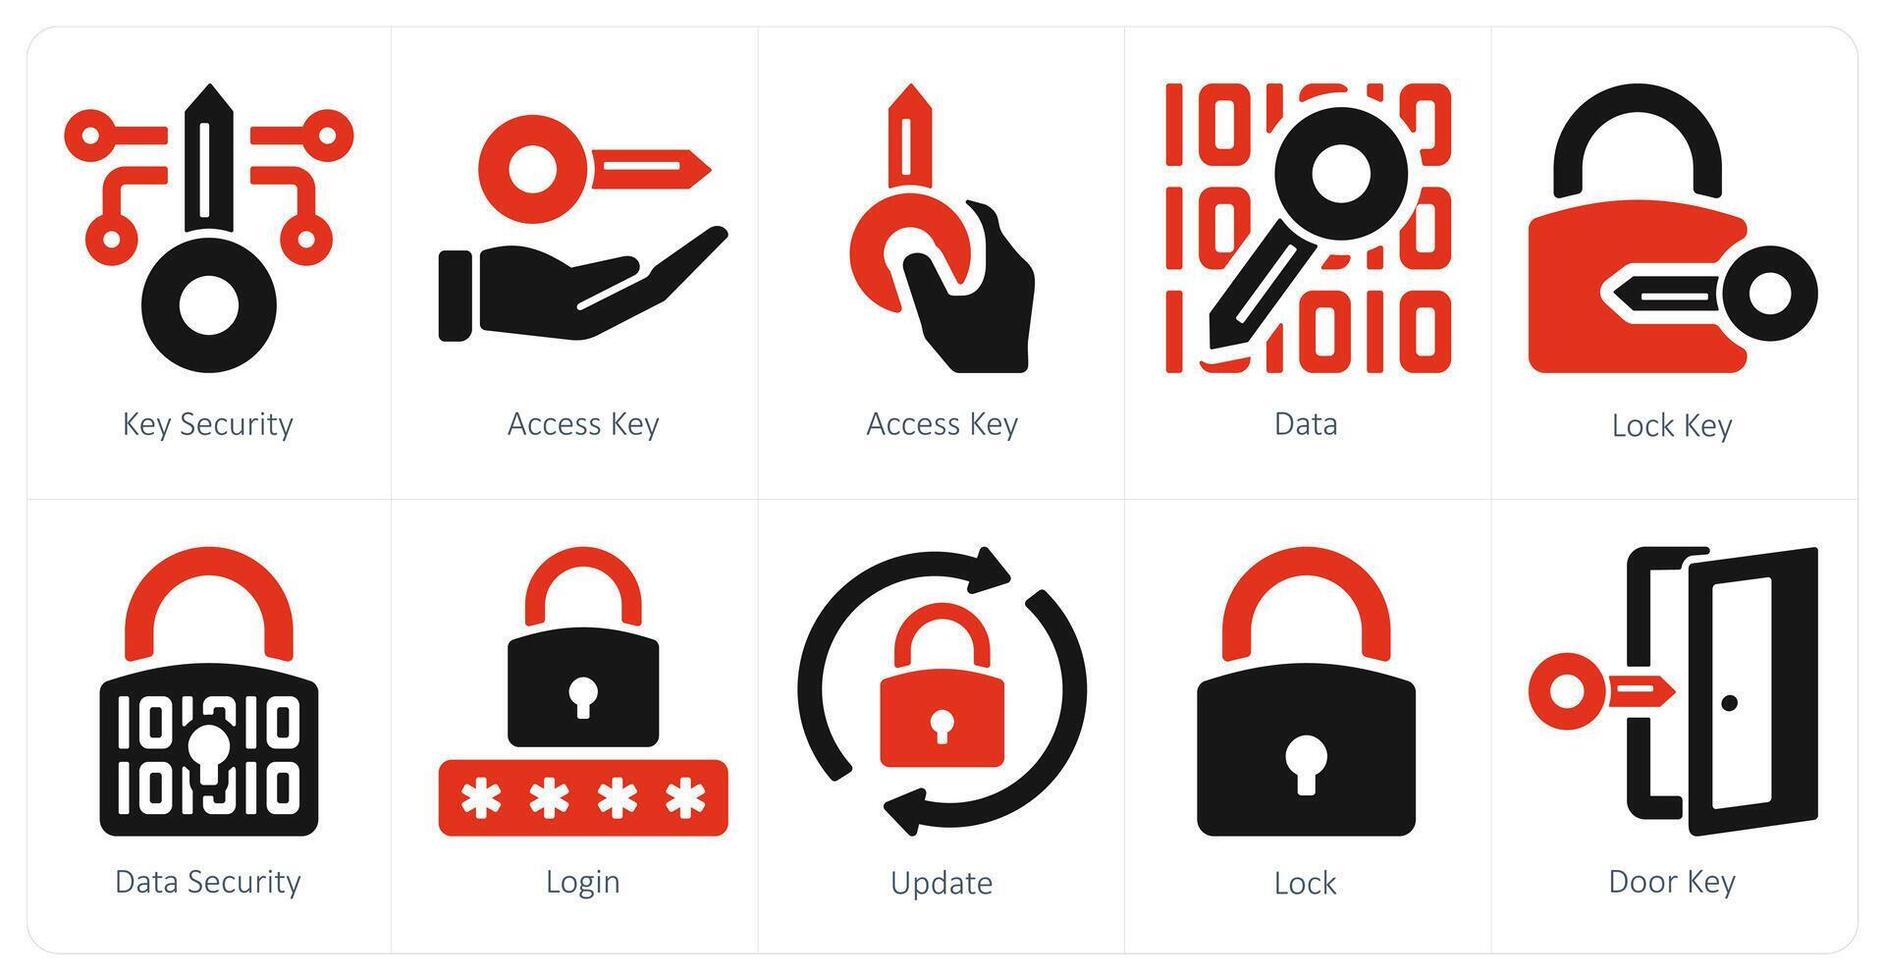 A set of 10 Security icons as key security, access key, data vector